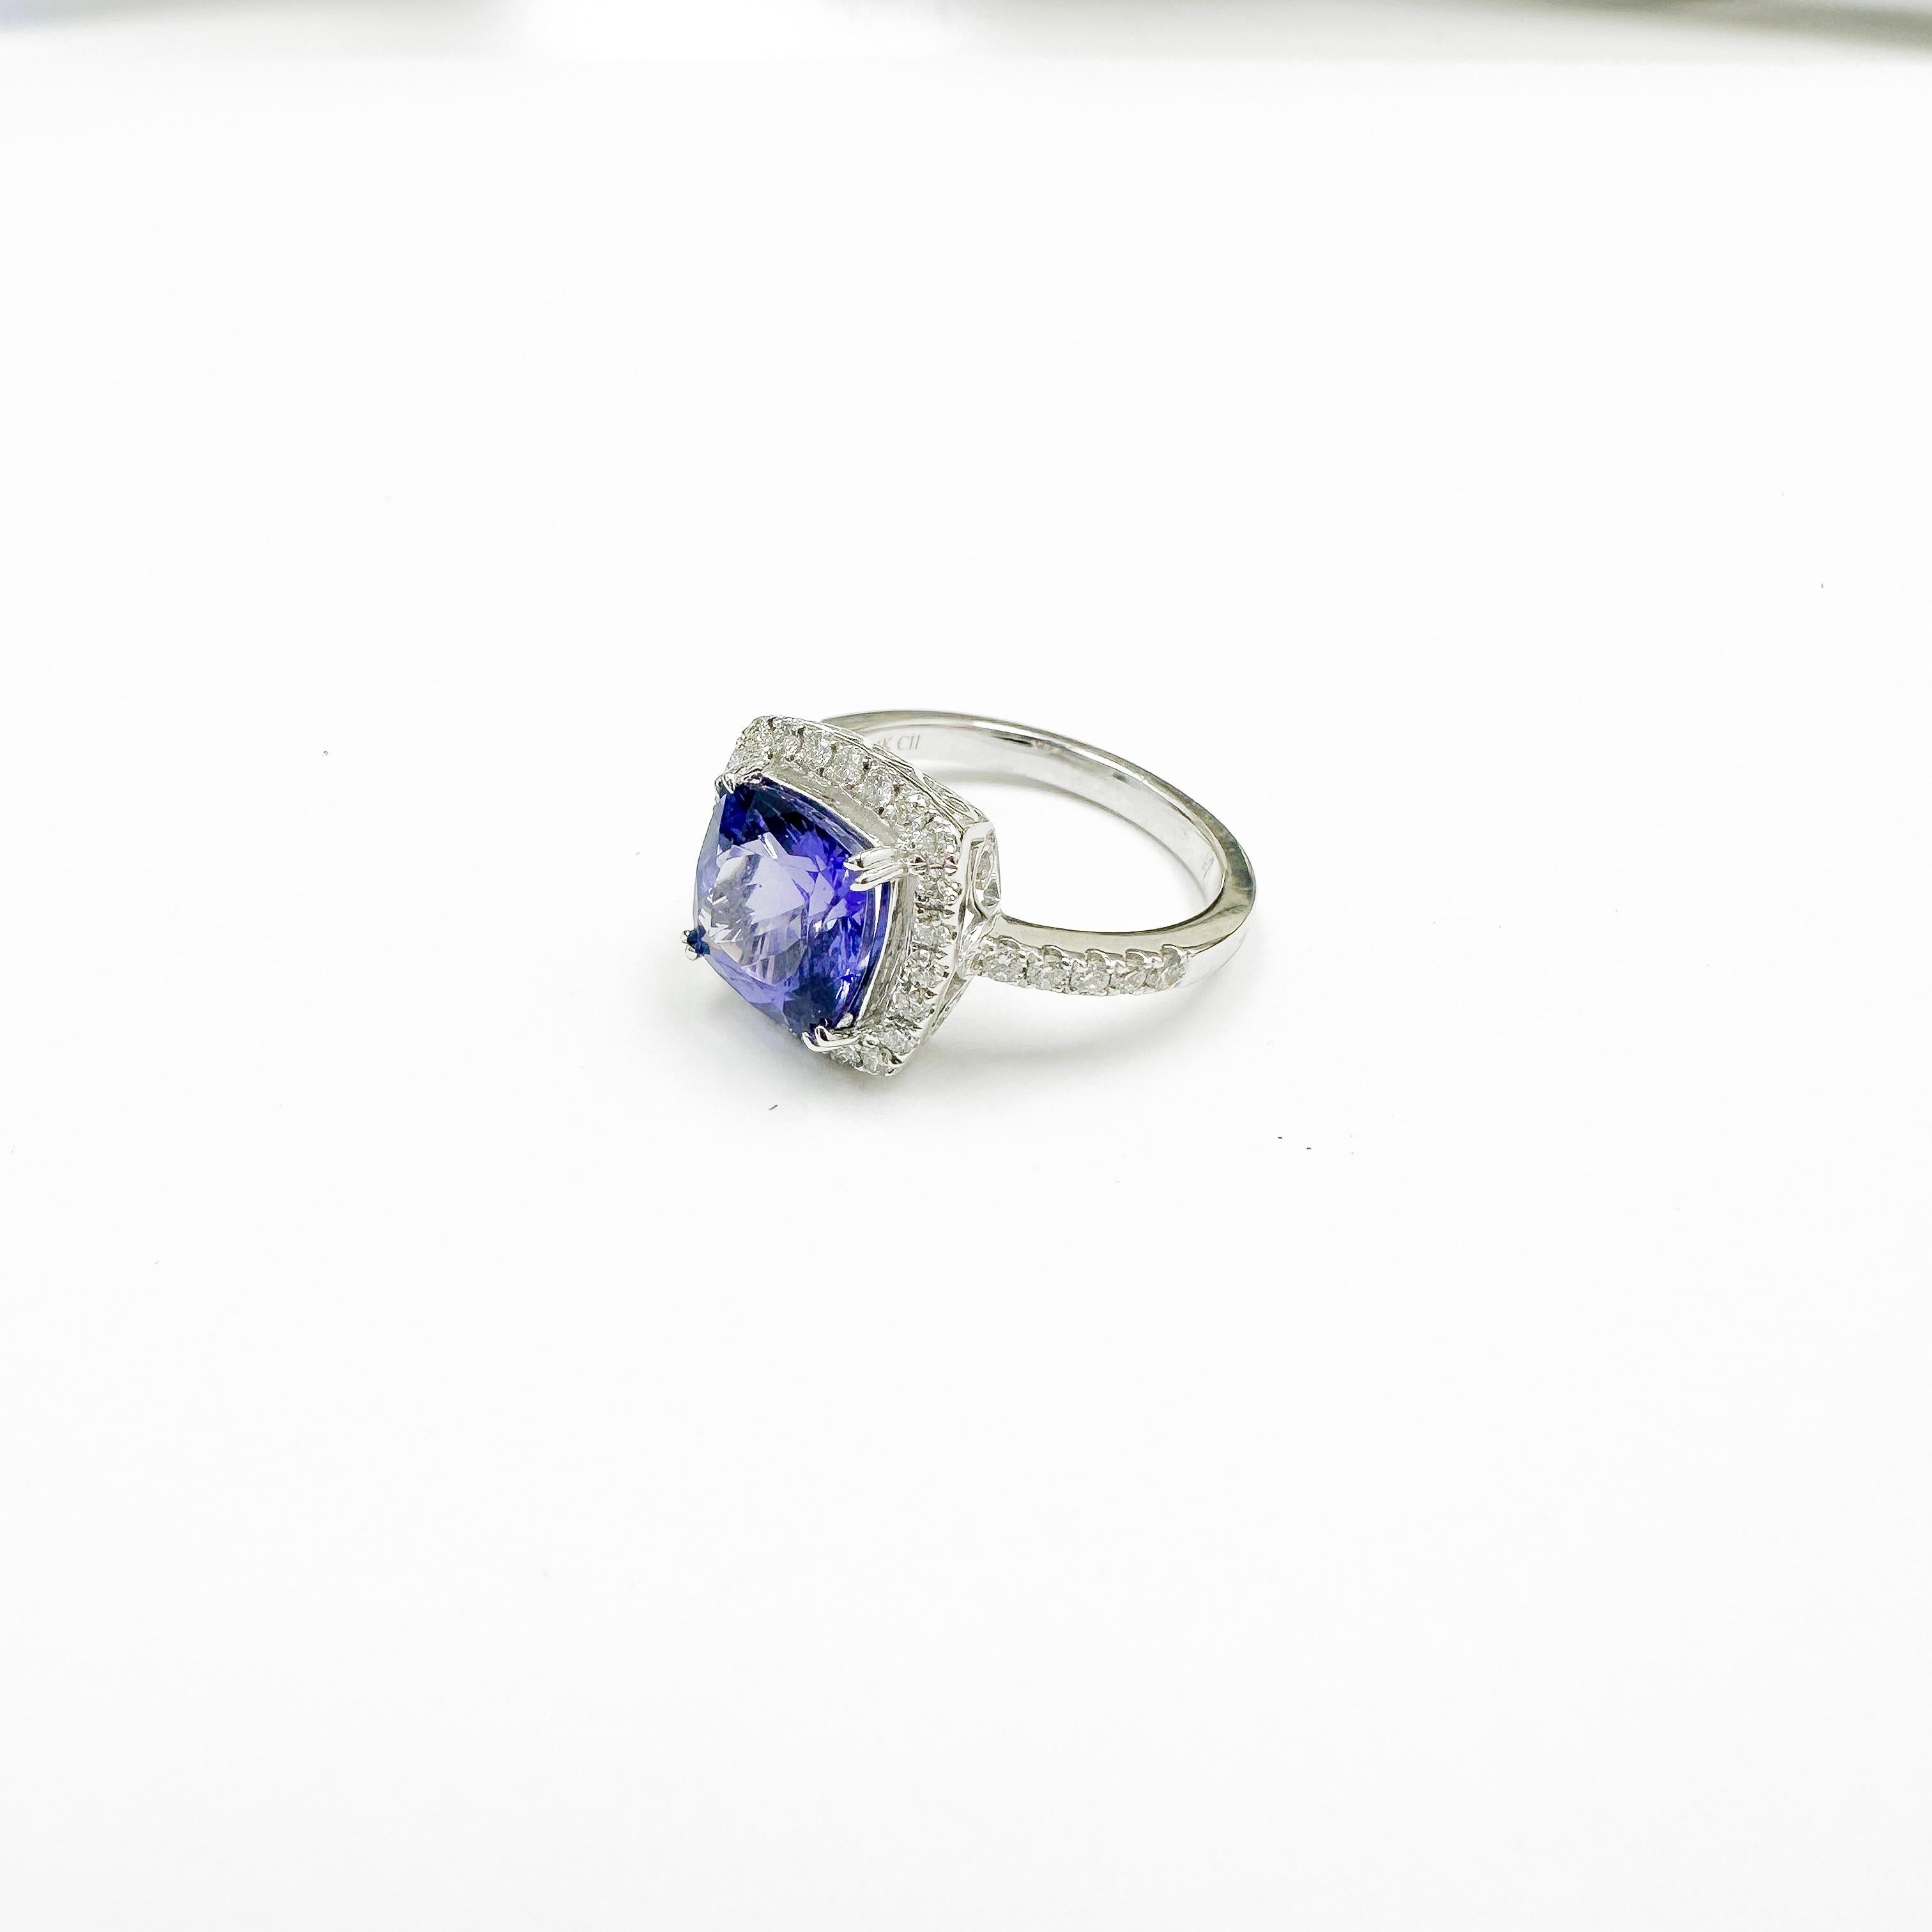 Glamorous Tanzanite Ring with bright Diamonds from all corners and sizes with a Cushion shape Tanzanite at its heart.

Secure Yours Today: Limited stock available. Don't miss the chance to secure your Tanzanite Diamond Ring today. It's not just a